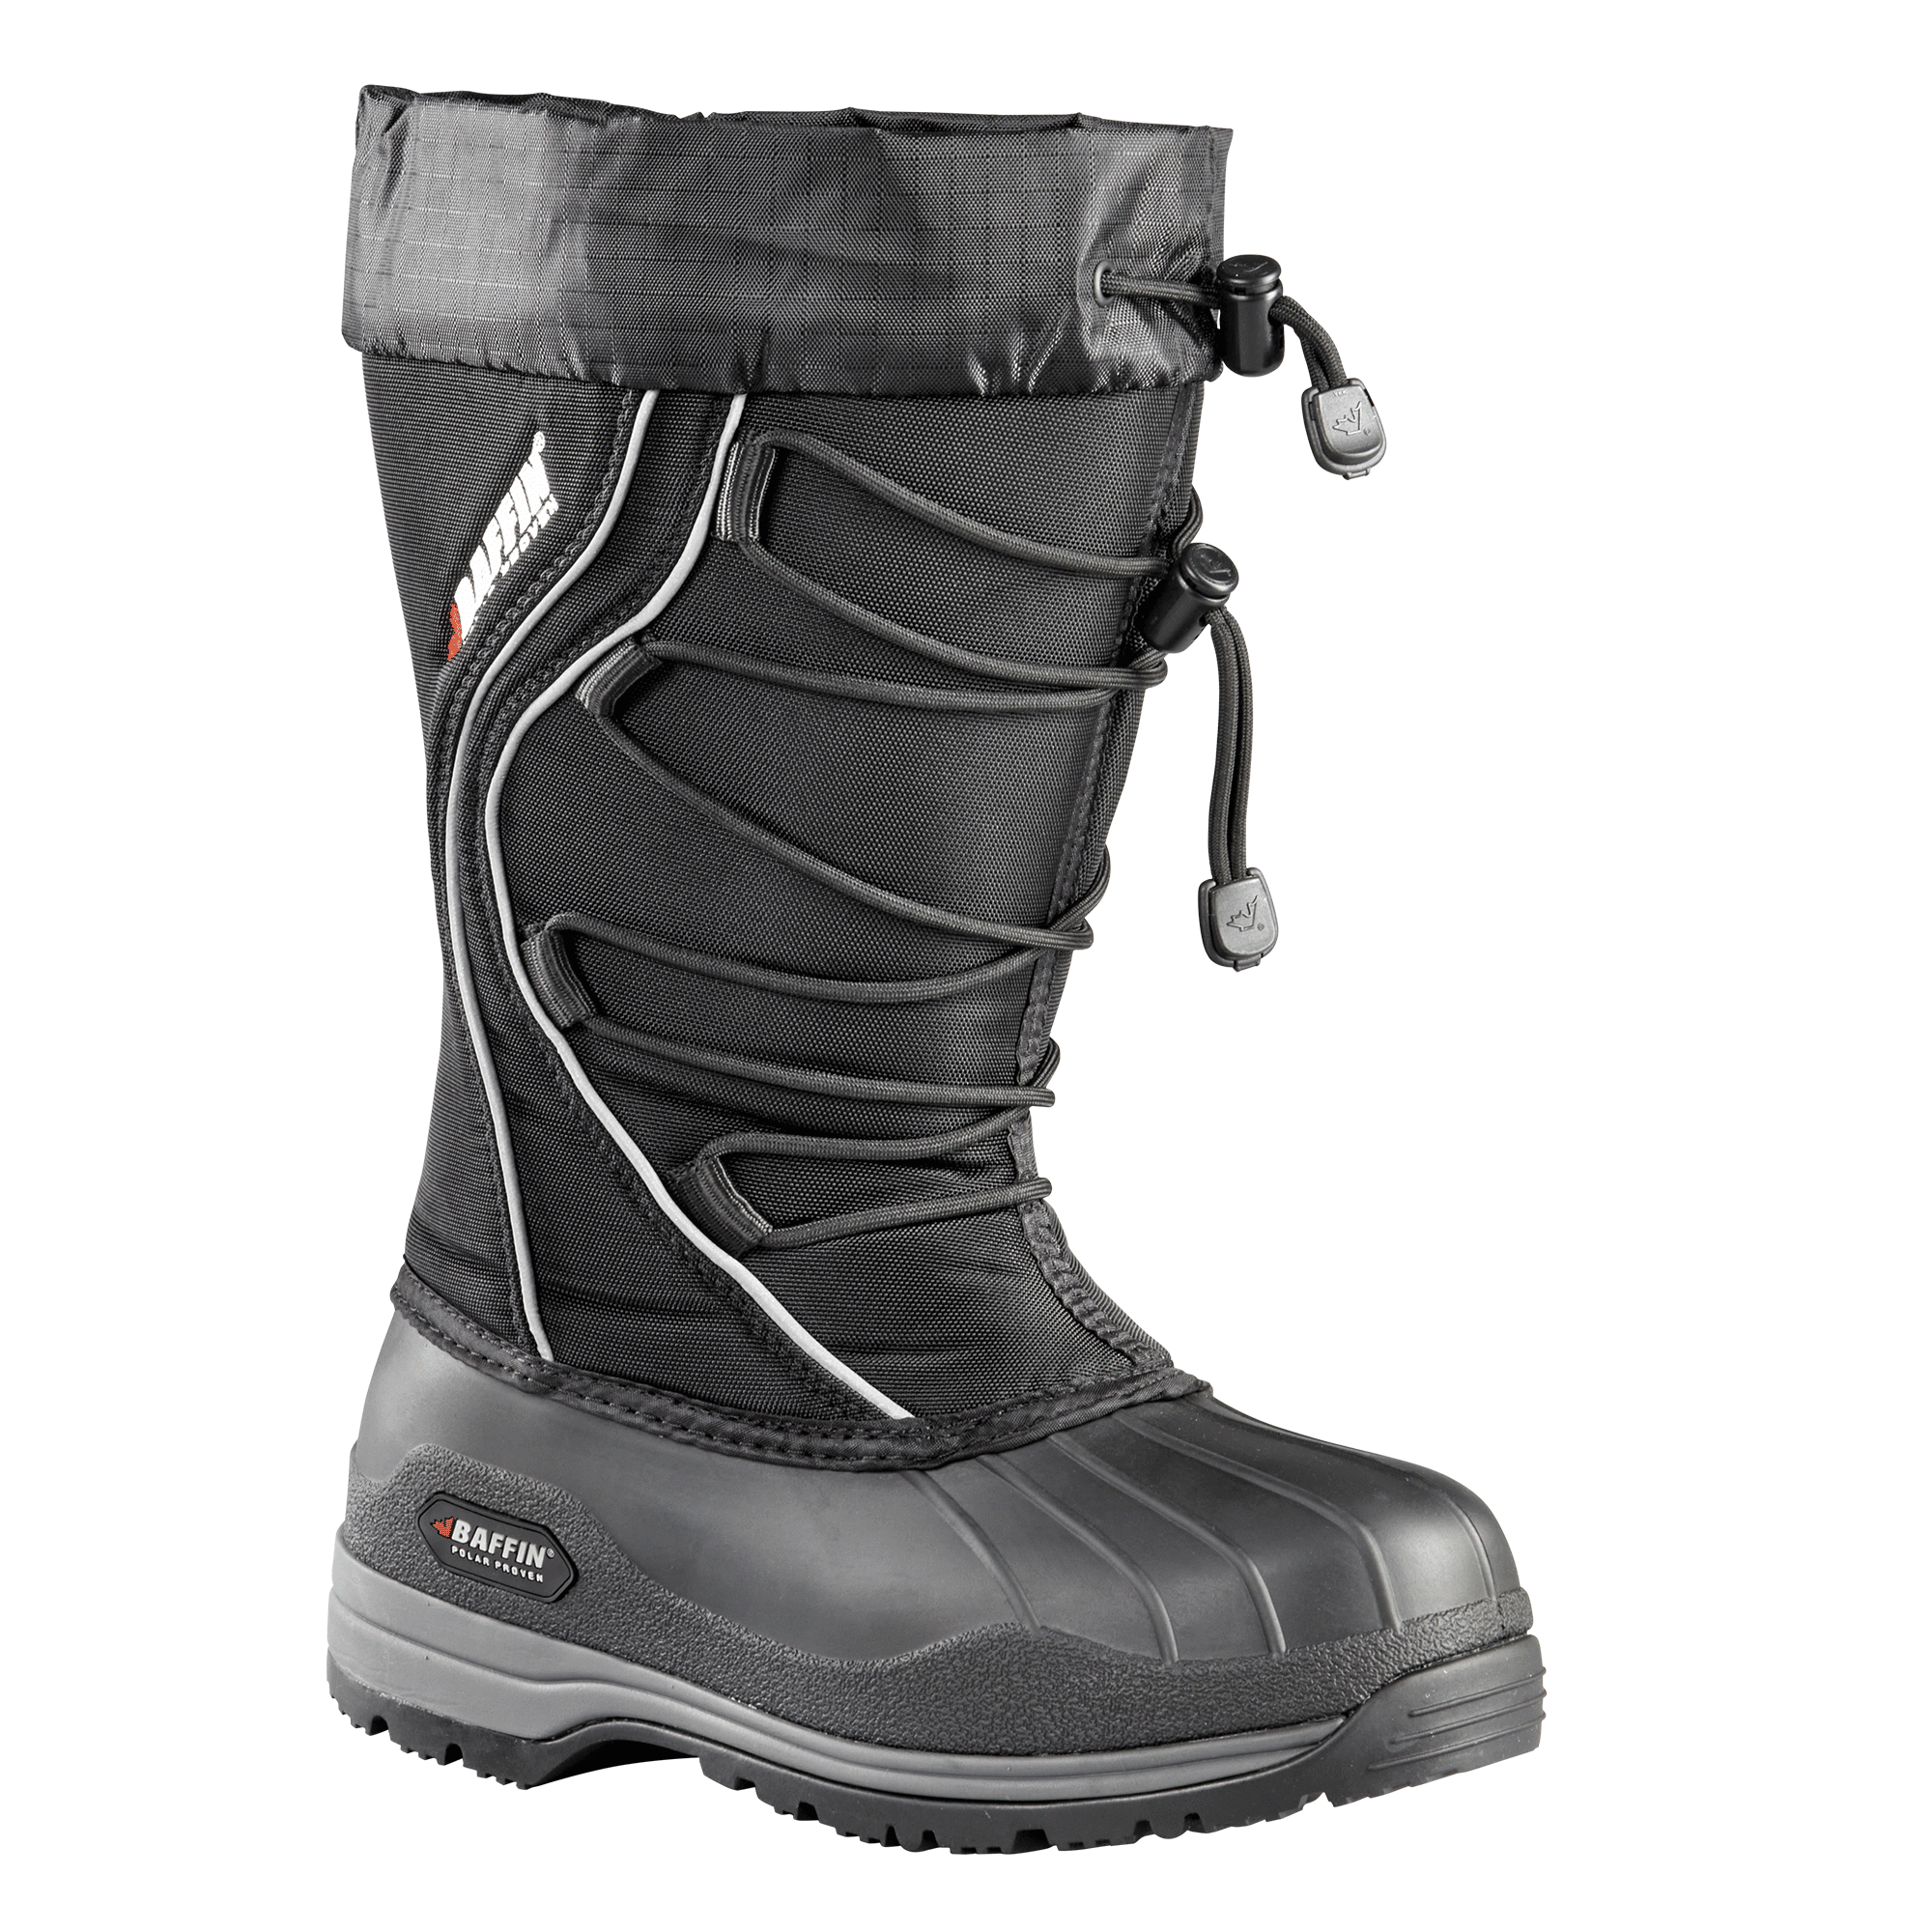 ICEFIELD | Women's Boot